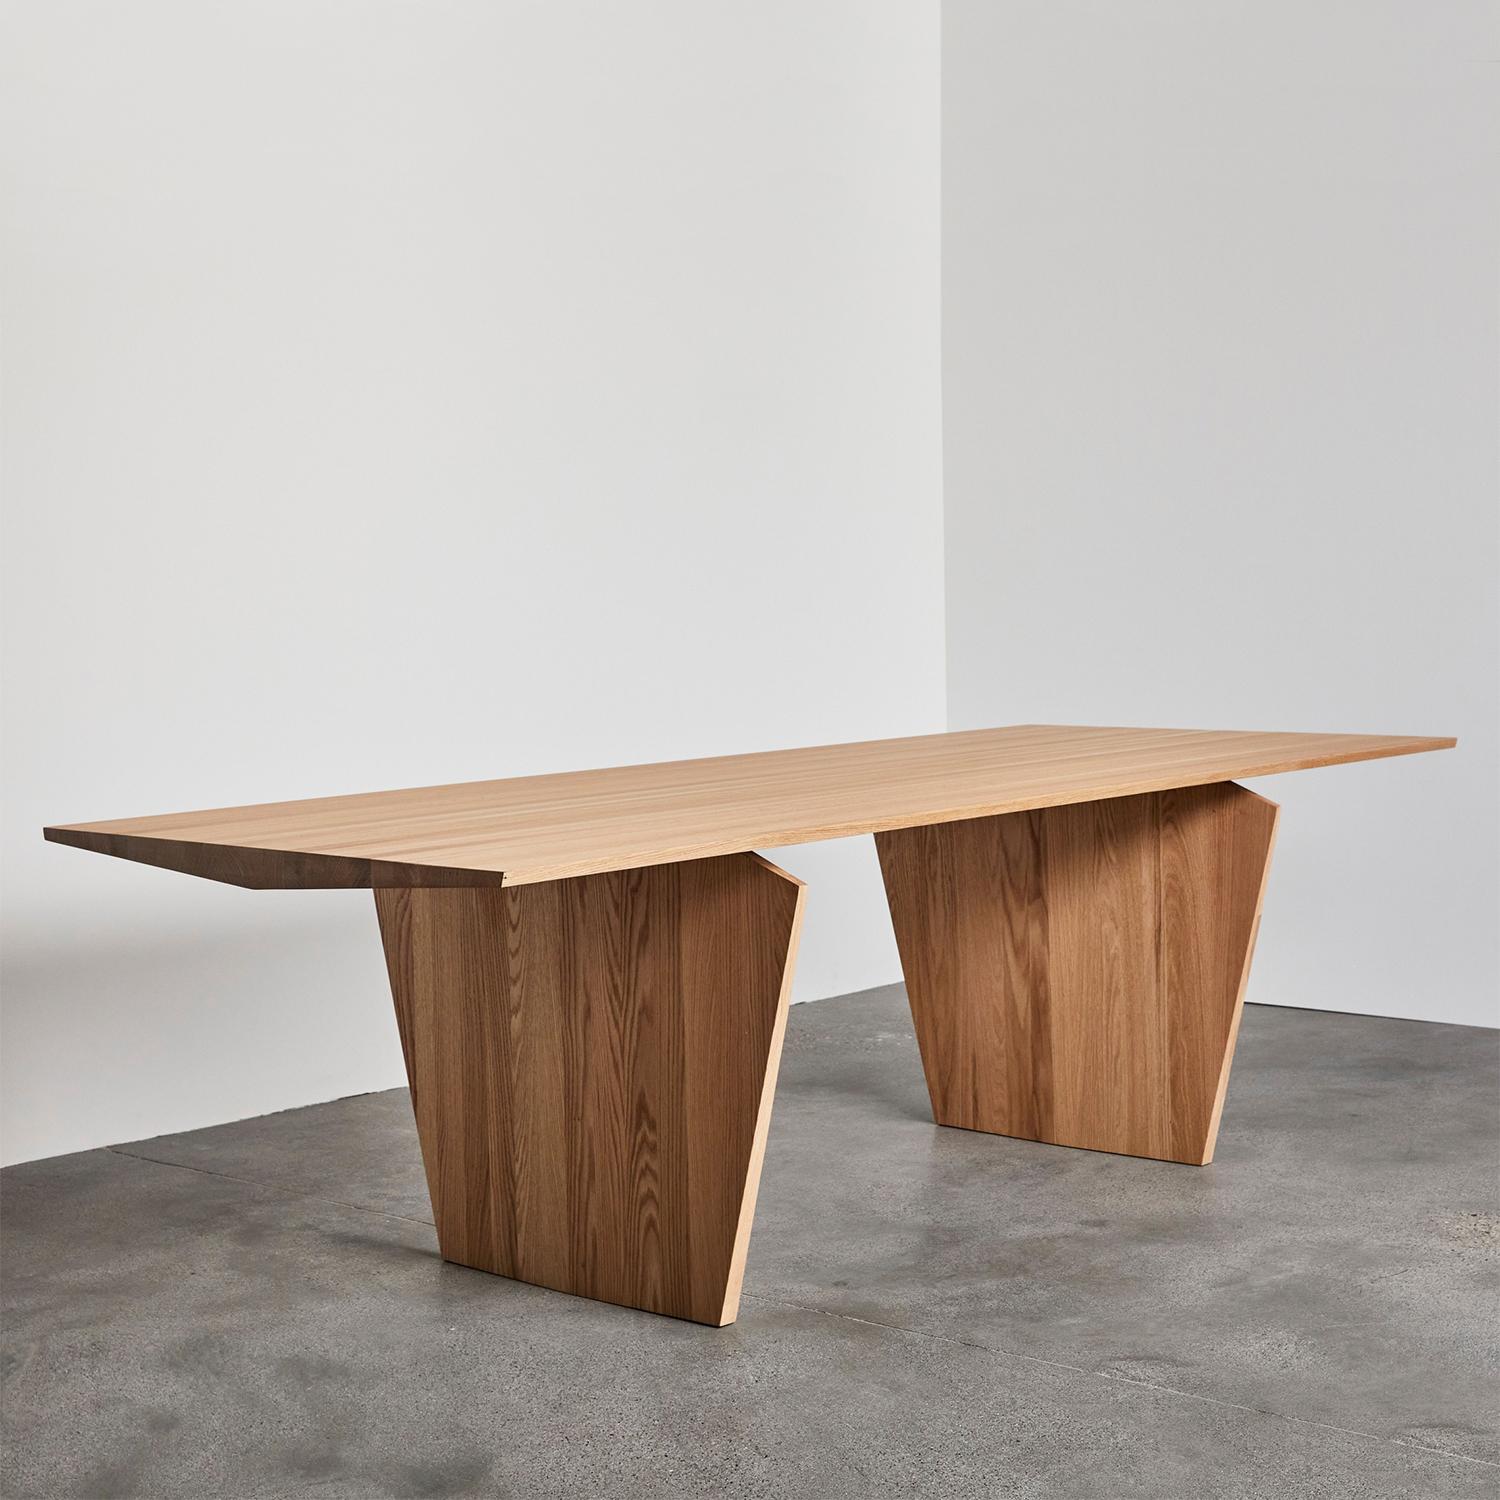 Dining Table Noba Oak with structure in solid oak in natural finish,
with thinned edges sides and designed shape. With solid oak top 
in glued lists.
Available in:
L200xP100xH75cm, price: 16400,00€
L220xP100xH75cm, price: 16900,00€
L240xP100xH75cm,